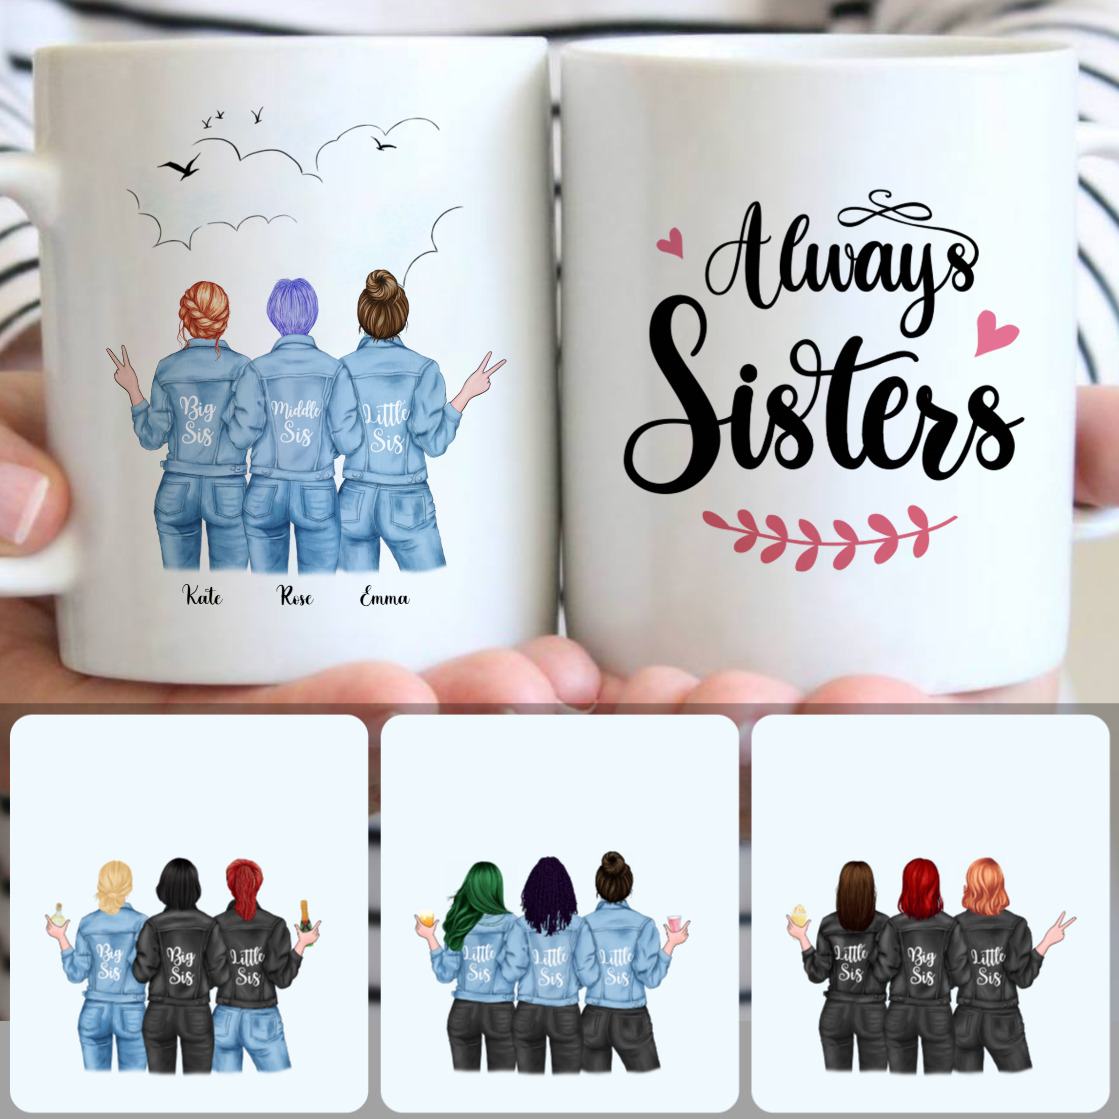 Personalized Mug, Surprise Birthday Gifts, 3 Cool Sisters Customized Coffee Mug With Names